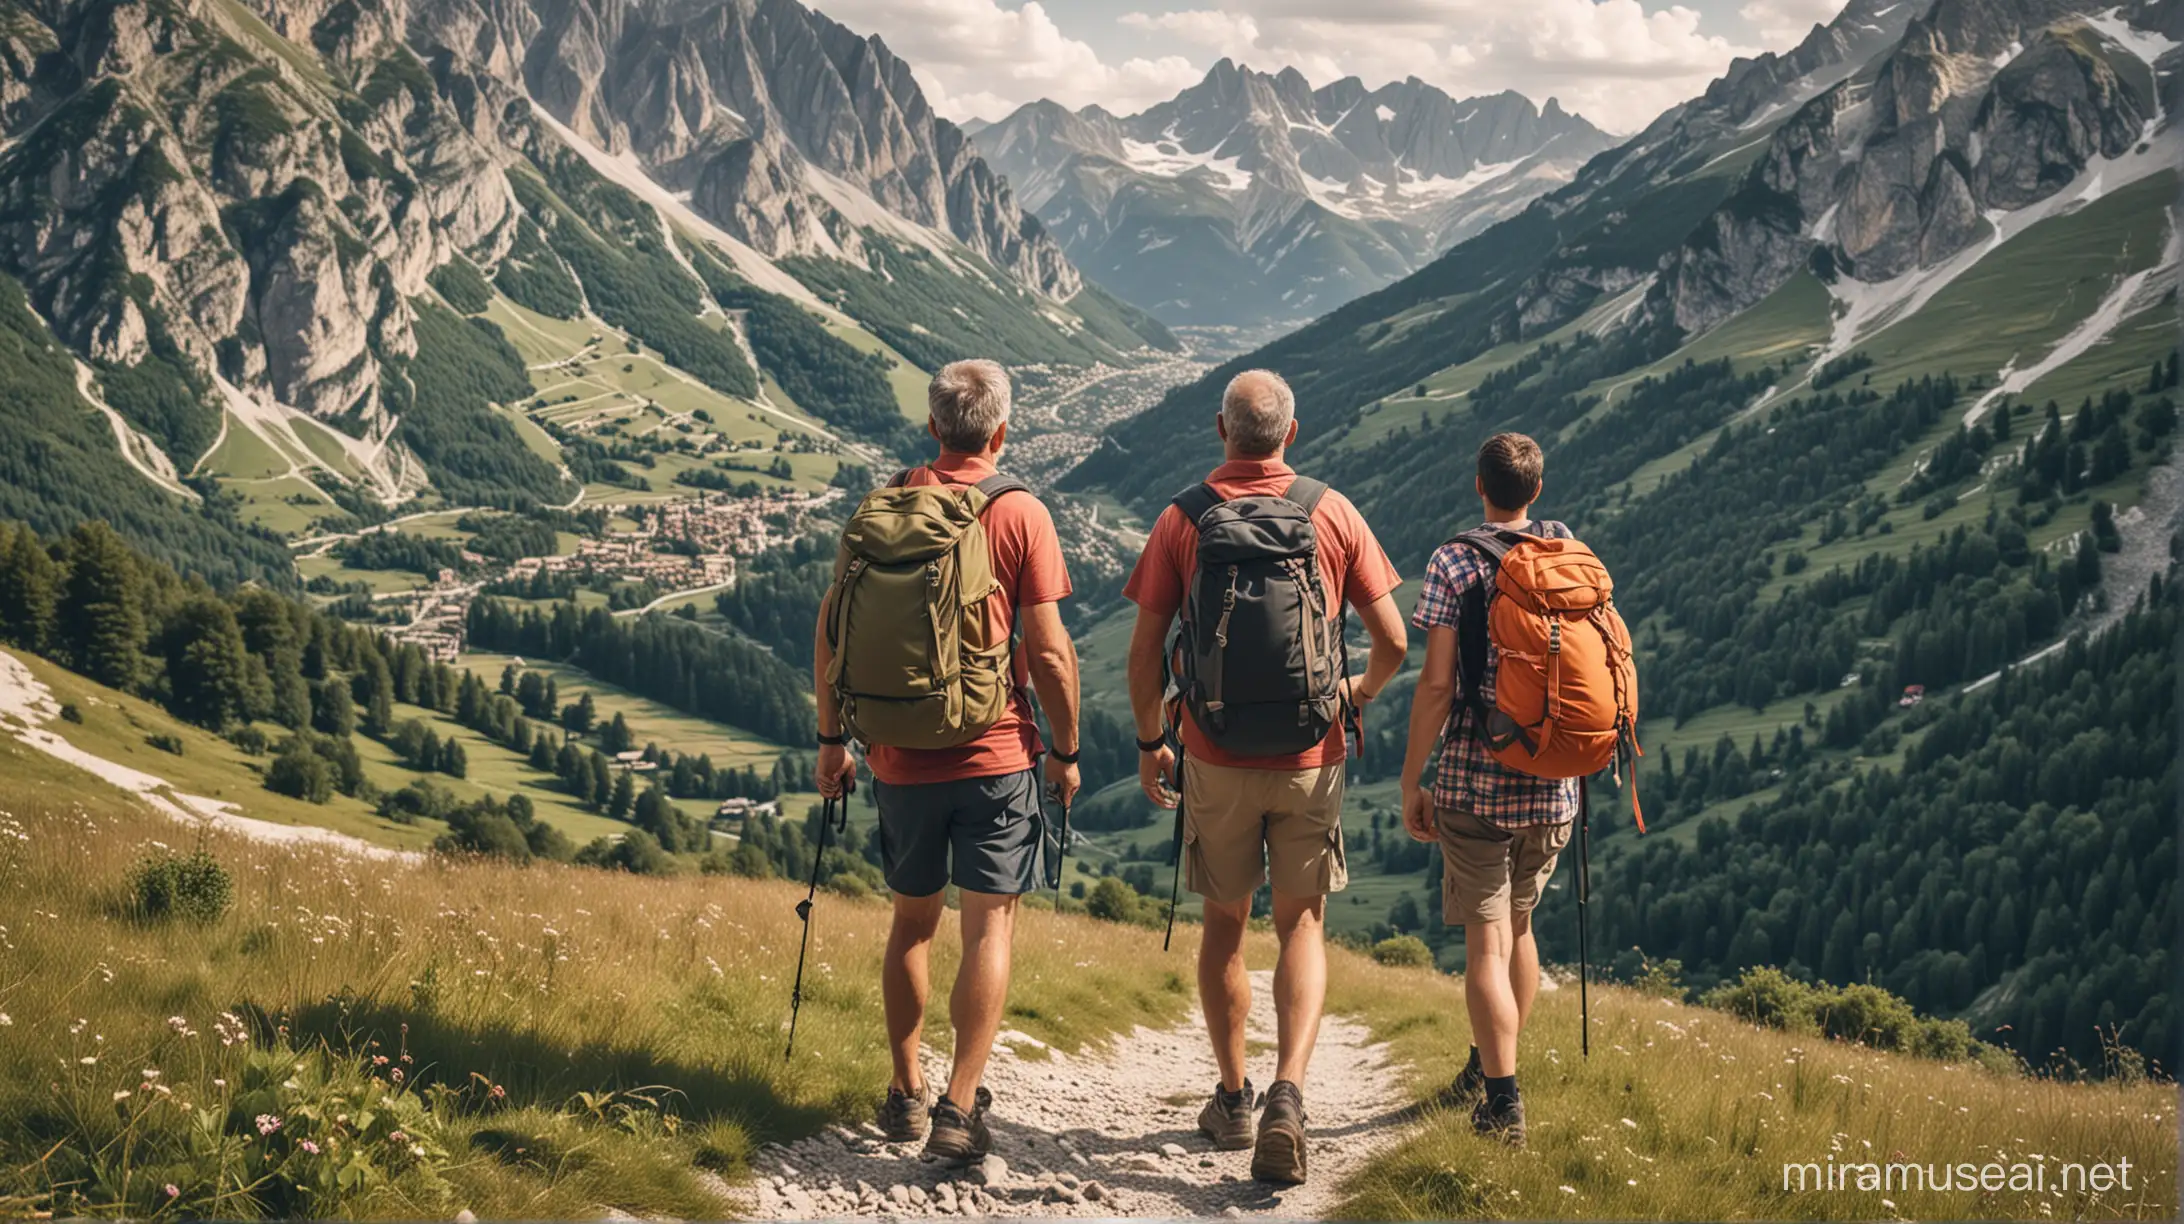 Youthful Trio and Elderly Father Bonding on Italian Alps Hike